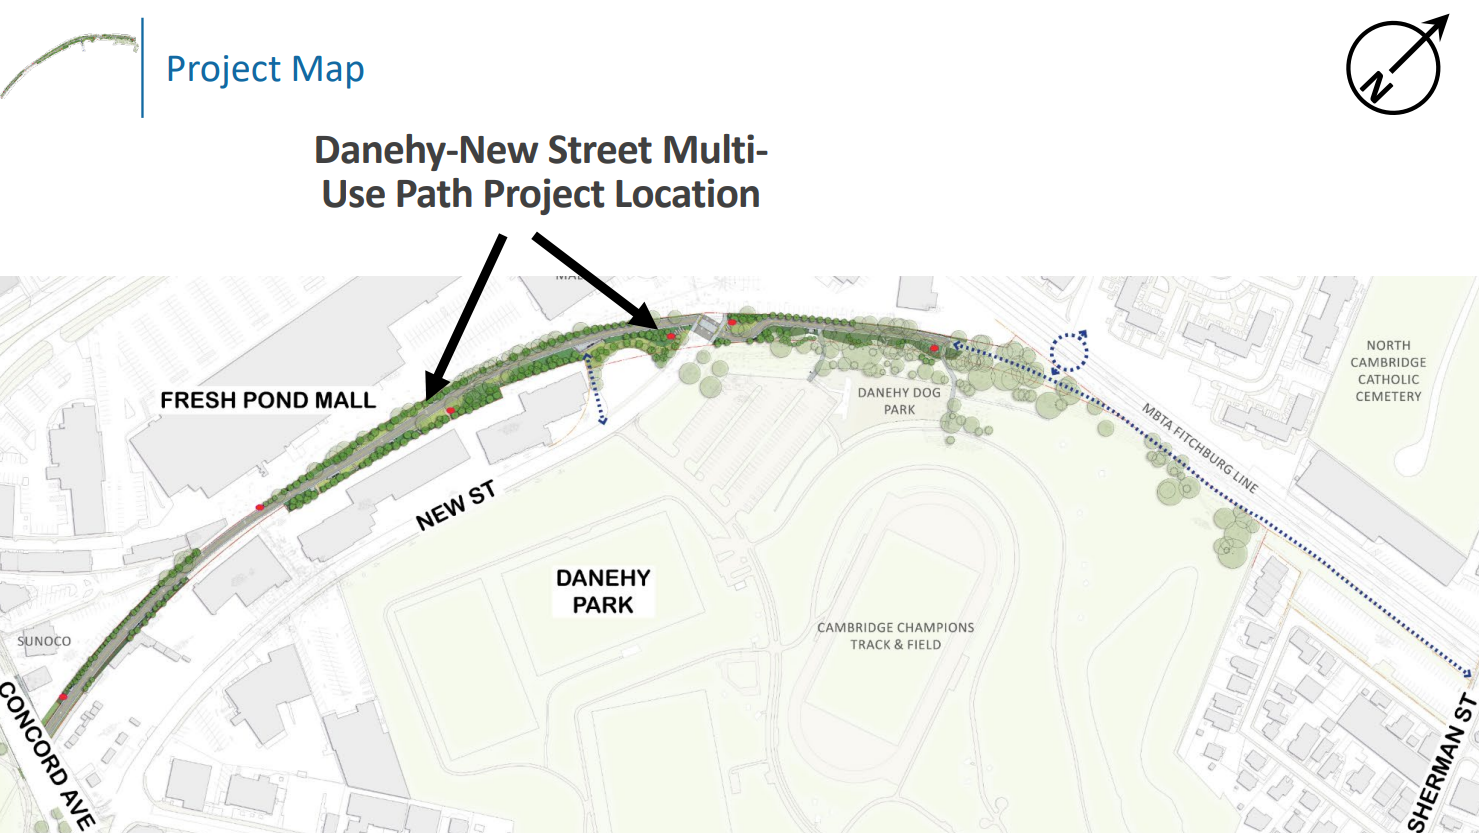 Project Map of Danehy-New Street Multi-Use Path Project location. From left to right, 2-D map shows Concord Avenue, Fresh Pond Mall, New Street, Danehy Park, Danehy Dog Park, Cambridge Champions Track & Field, MBTA Fitchburg Line, North Cambridge Catholic Cemetery, and Sherman Street. Along curve between Concord Avenue and Sherman Street, map shows project plan for crossings indicated by blue dotted lines, tree planting indicated by small tree graphics, and points of entry indicated by red dots.